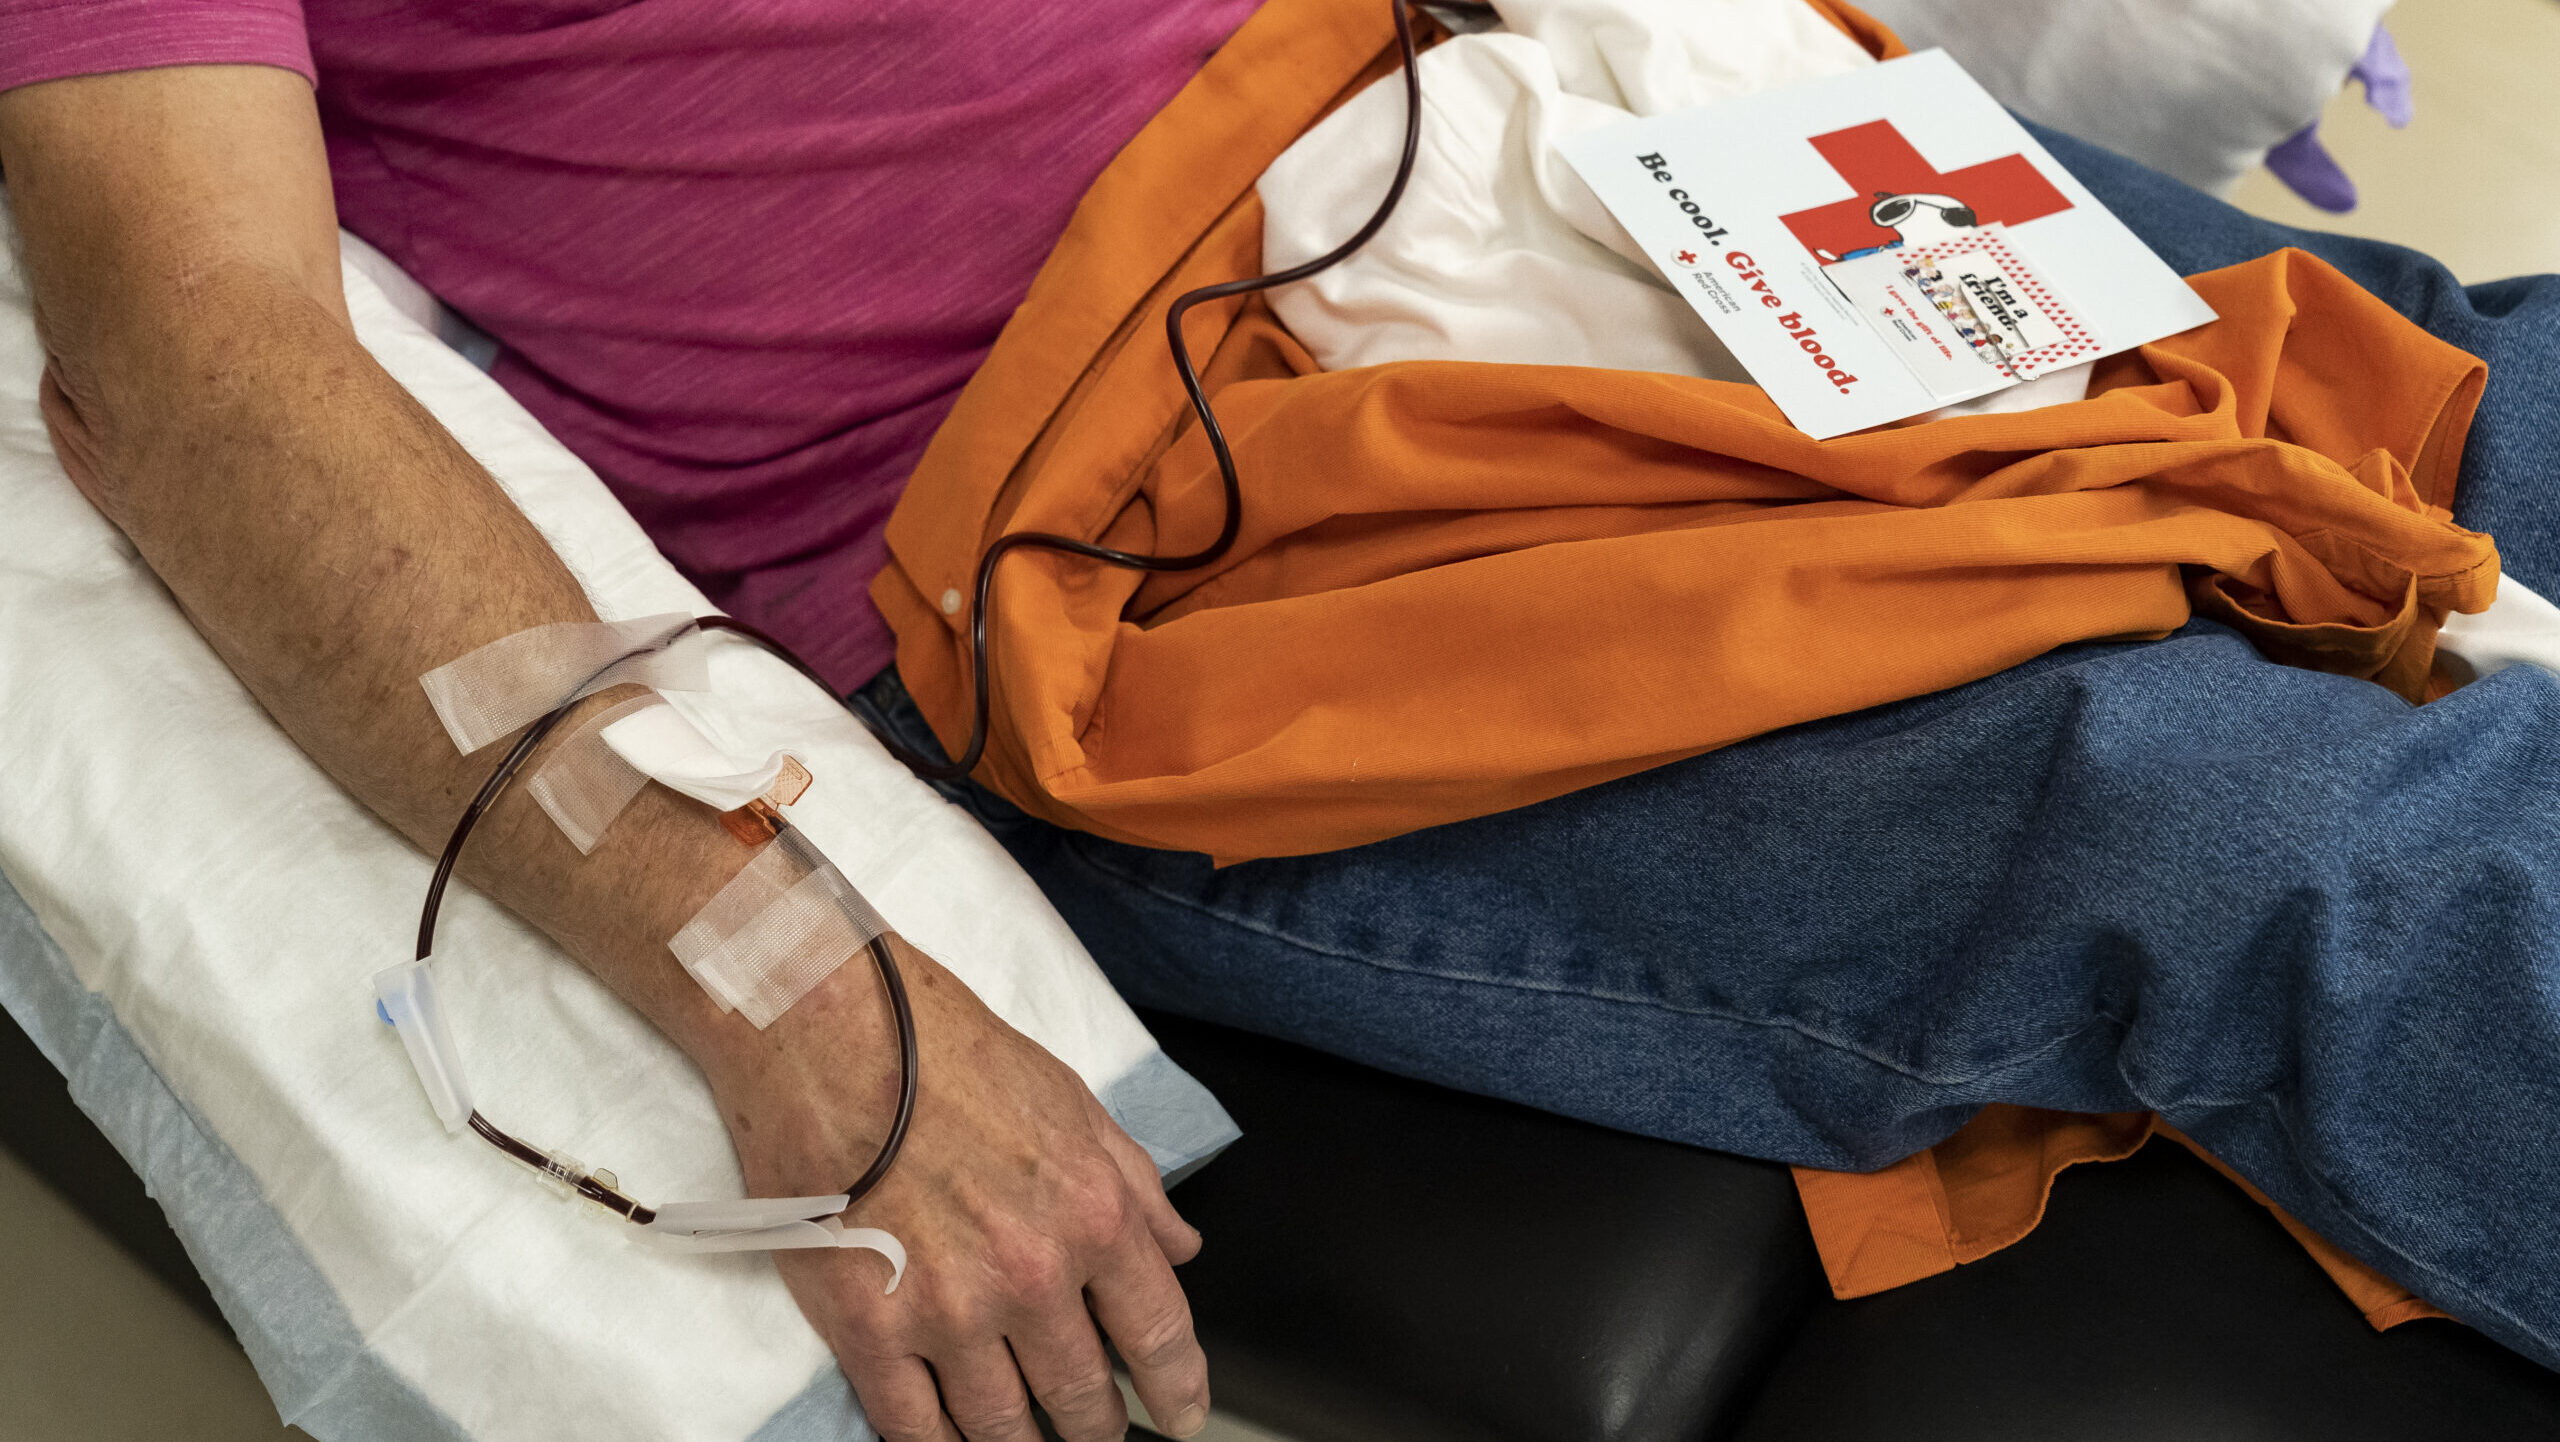 Cold storage platelet program could be life saving, Red Cross says [Video]